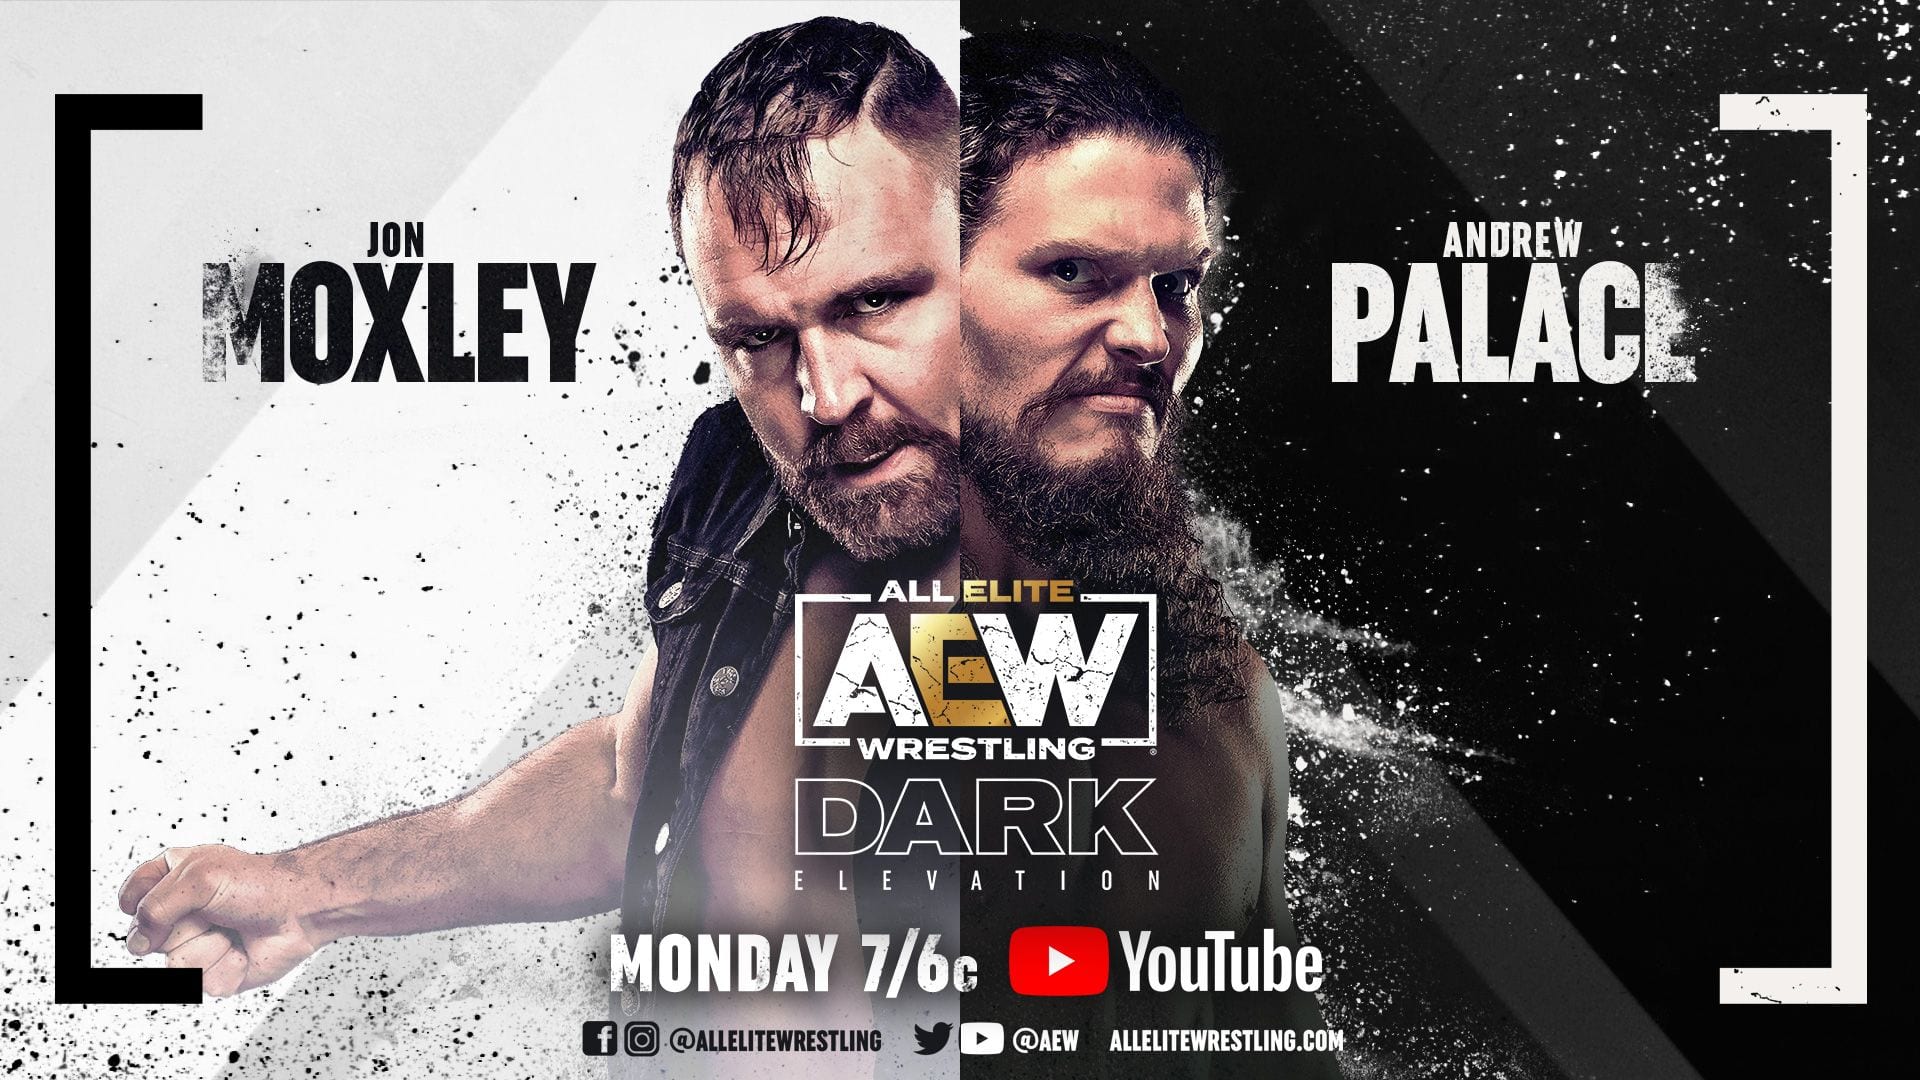 Jon Moxley And Others Announced For AEW Dark: Elevation Inc